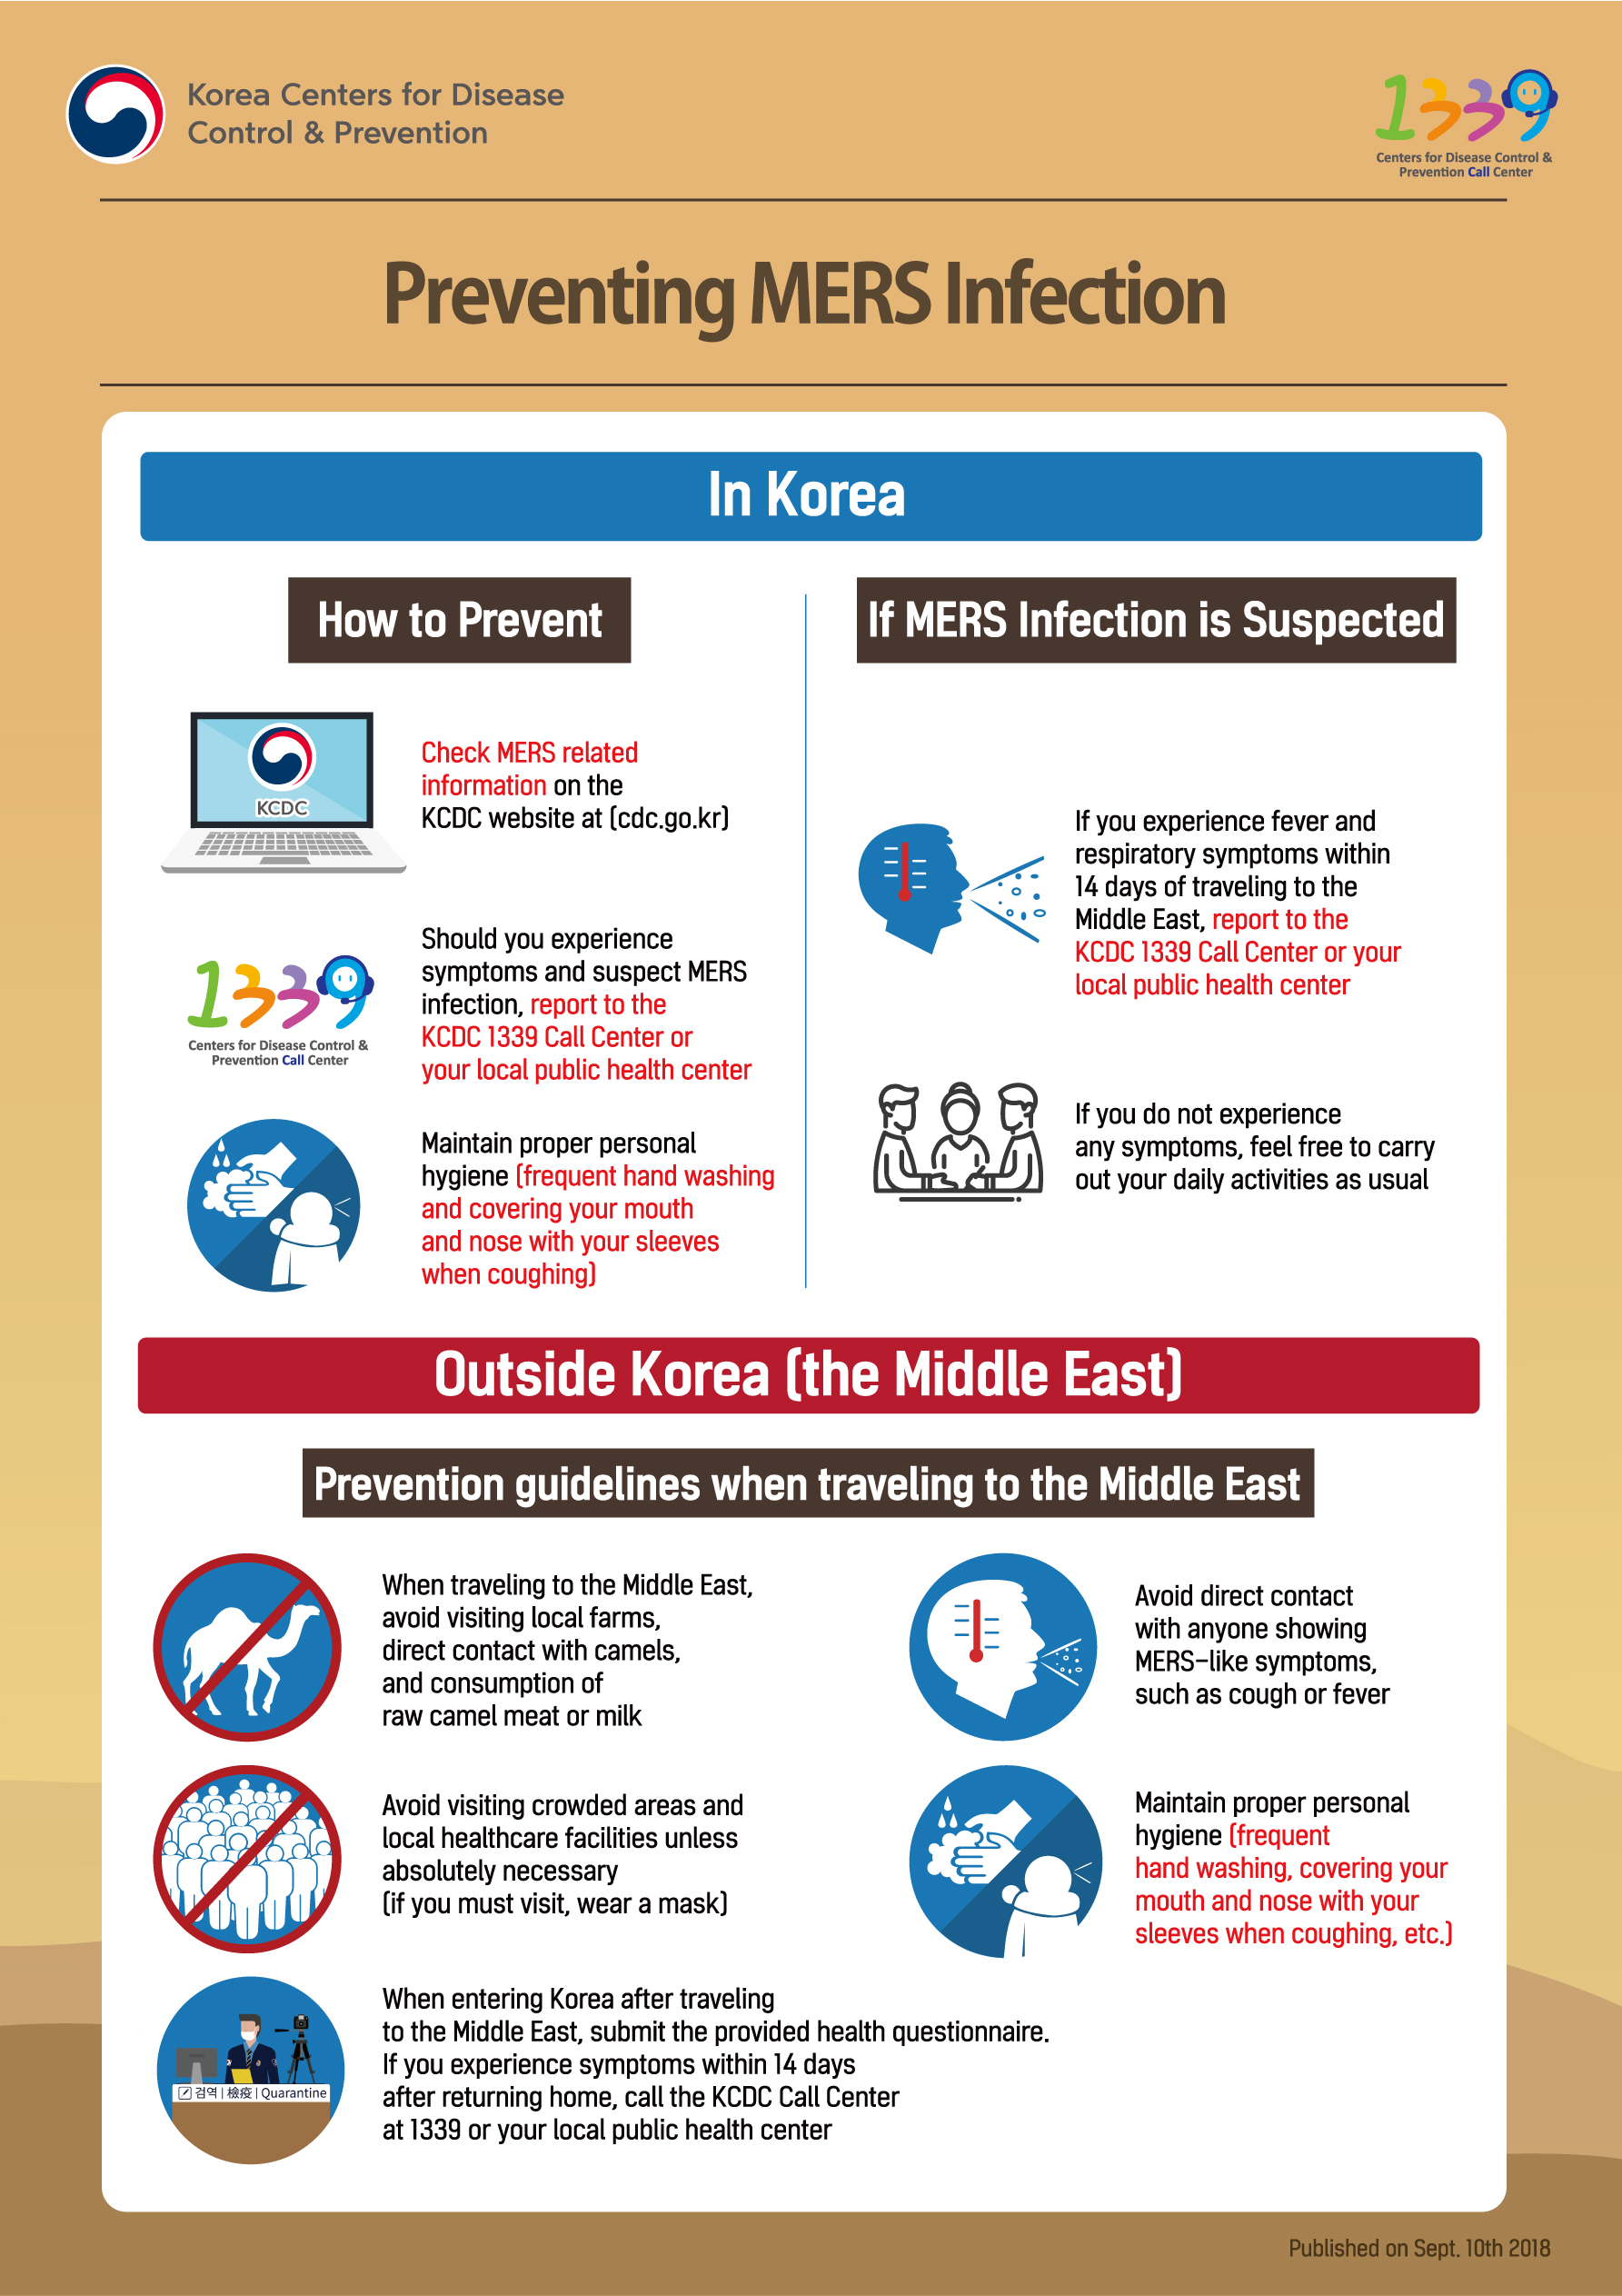 Korea Center for Disease Control&Prevention. 1339 Center for Disease Control&Prevetion Call Center.[Preventing MERS Infection]
1. In Korea
How to prevent
Check MERS related information on the KCDC website at (cdc.go.kr)
Should you have experience symptoms and suspect MERS infection, report to the KCDC 1339 Call Center or your local public health center
Maintain proper personal hygiene (frequent hand washing and covering your mouth and nose with your sleeves when coughing)
If MERS Infection is Suspected
If you experience fever and respiratory symptoms whithin 14 days of traveling to the Middle East, report to the KCDC 1339 Call Center or your local public health center
If you do not experience any symptoms, feel free to carry out your daily activities as usual
2.Outside the Country (the Middle East)
Prevention guidelines when traveling to the Middle East
When traveling to the Middle East, avoid visiting local farms, direct contact with camels, and consumption of raw camel meat or milk
Avoid visiting crowded areas and local healthcare facilities unless absolutely necessary (if you must visit, wear a mask)
Avoid direct contact with anyone showing MERS-like symptoms, such as cough or fever
Maintain proper personal hygiene (frequent hand washing and covering your mouth and nose with your sleeves when coughing)
When entering Korea after traveling to the Middle East, submit the provided health questionnaire. If you experience symptoms within 14days after returning home, call the KCDC Call Center at 1339 or your local public health center
Published on Sept. 10th 2018
